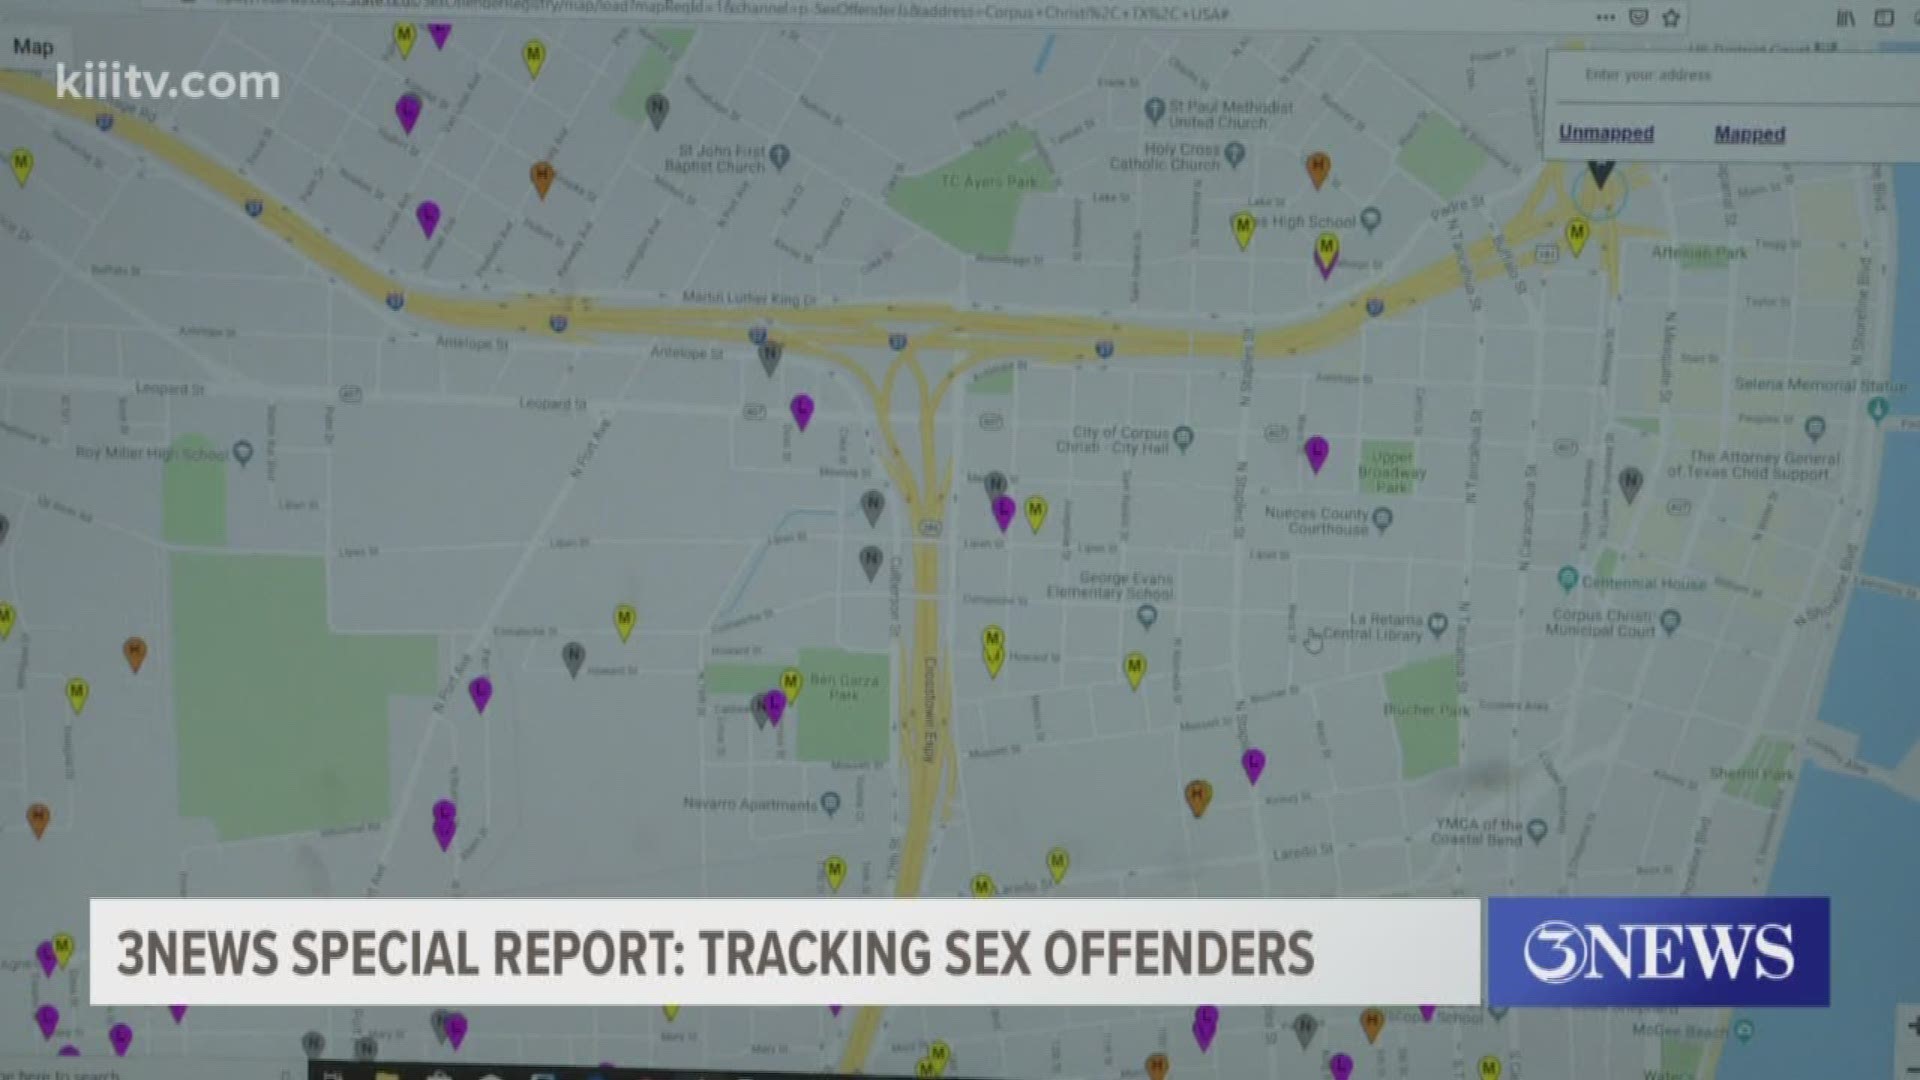 The DPS Public Sex Offender Website will tell you where registered sex offenders live, each one represented by a pinpoint on the map.